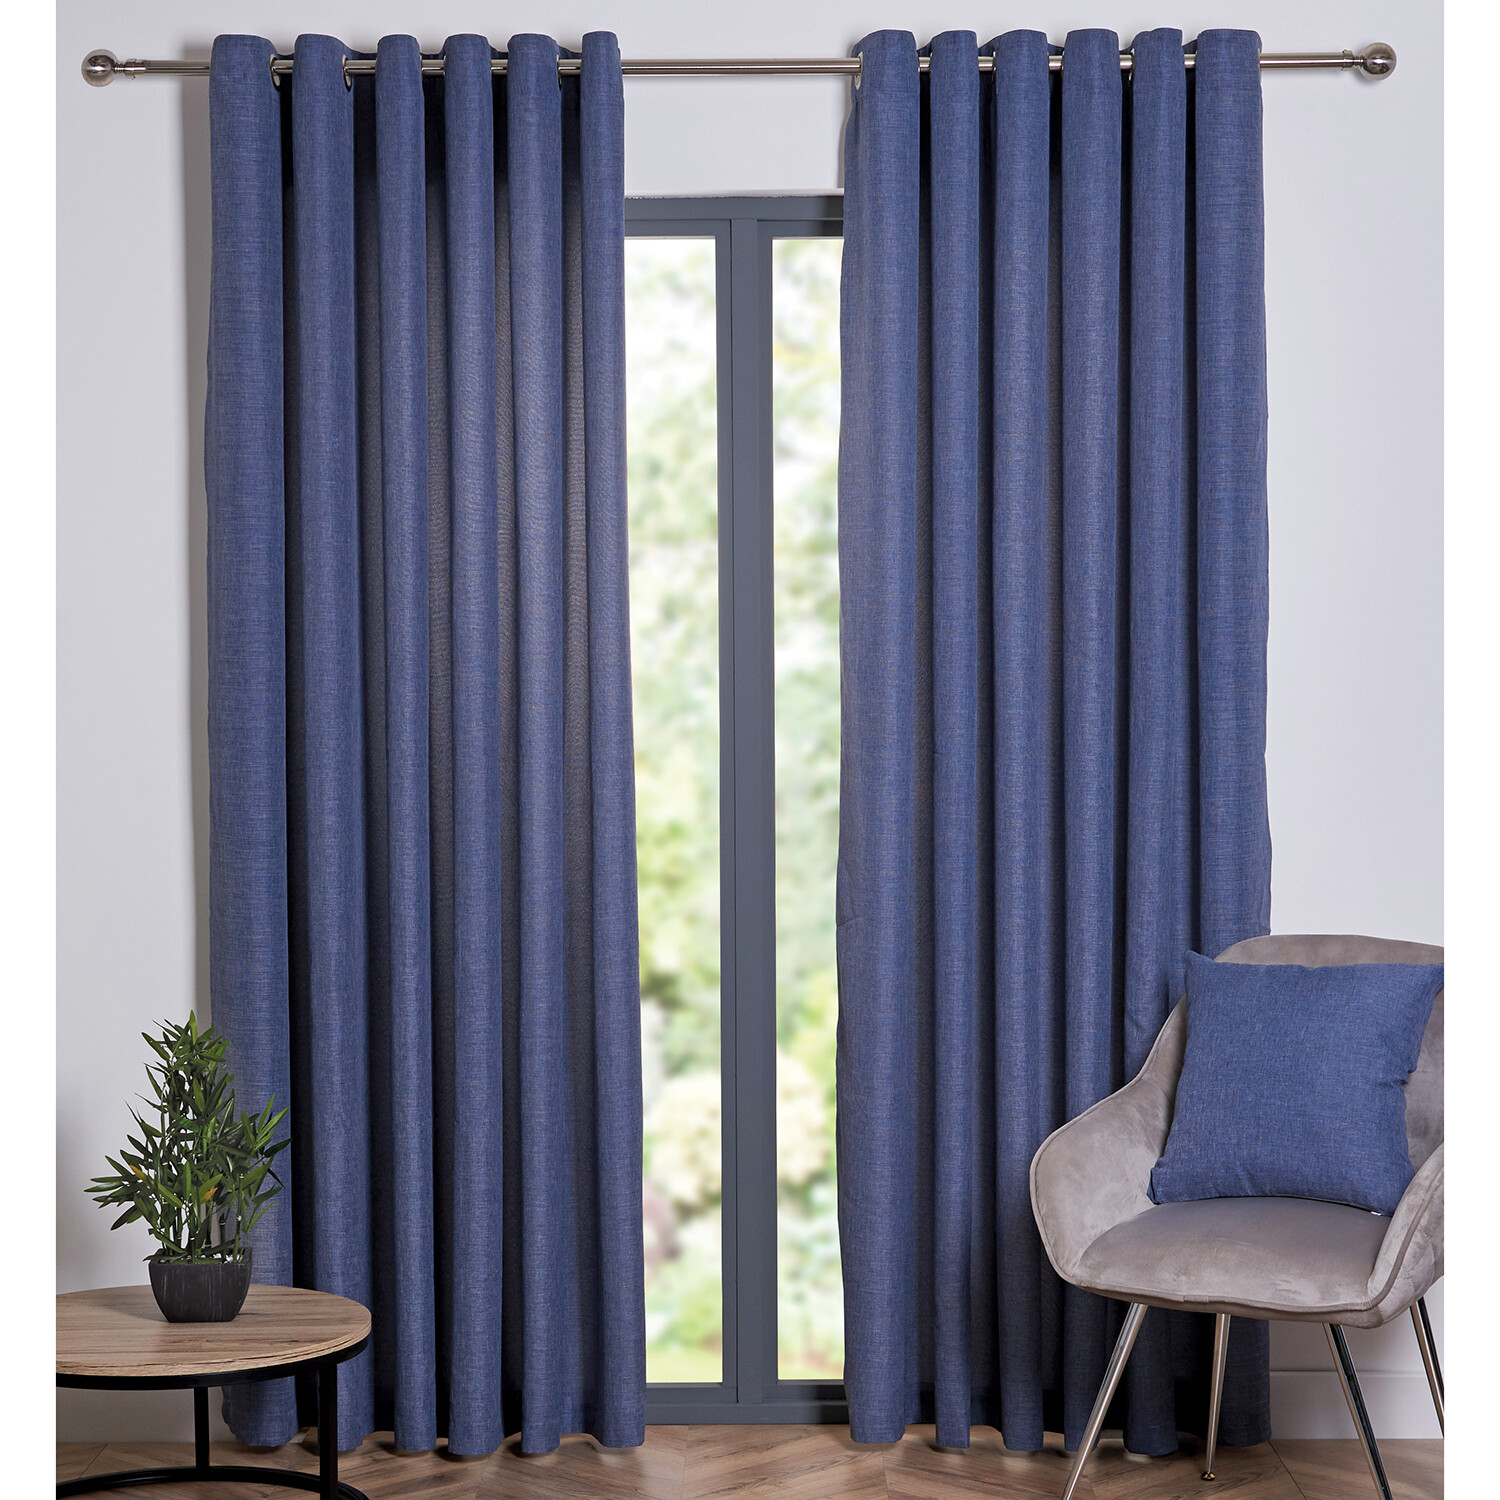 My Home Taylor Navy Eyelet Curtains 229 x 229cm Image 1